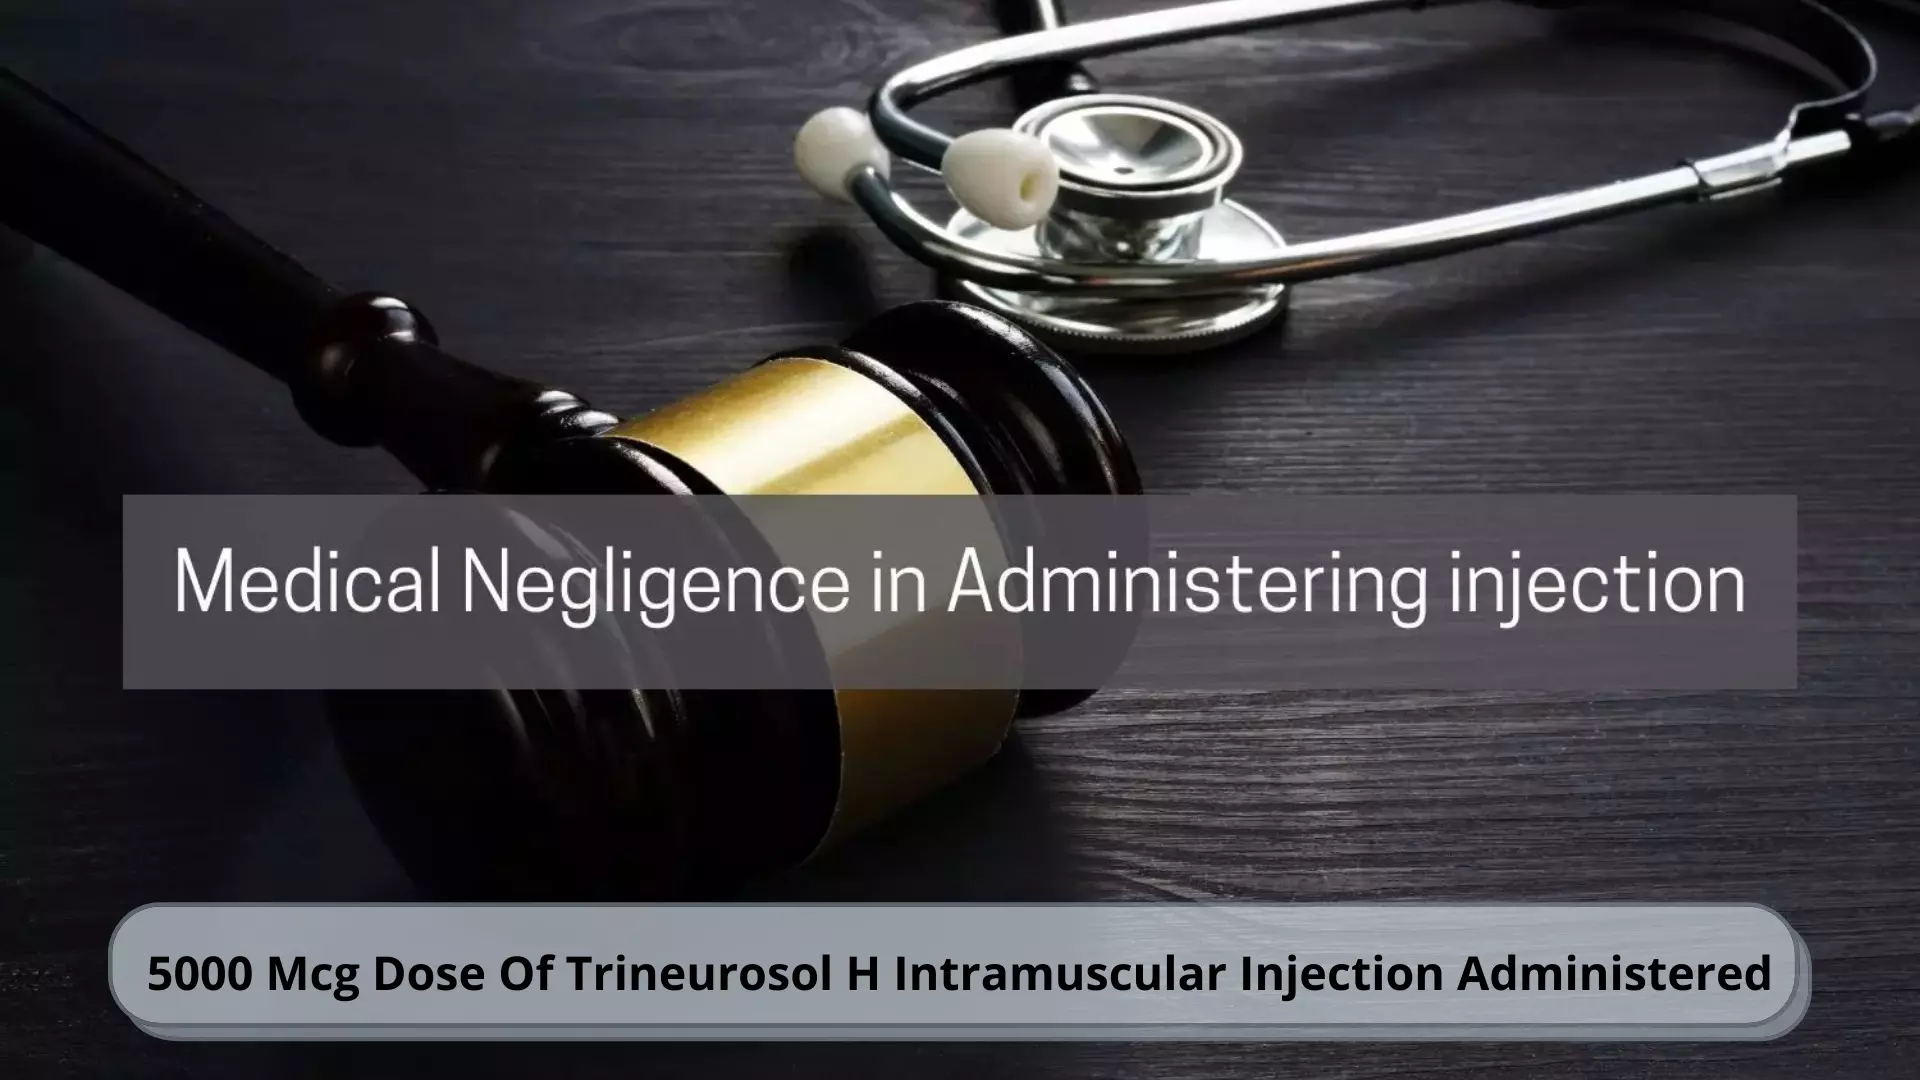 5000 Mcg Dose of Trineurosol H Intramuscular Injection administered